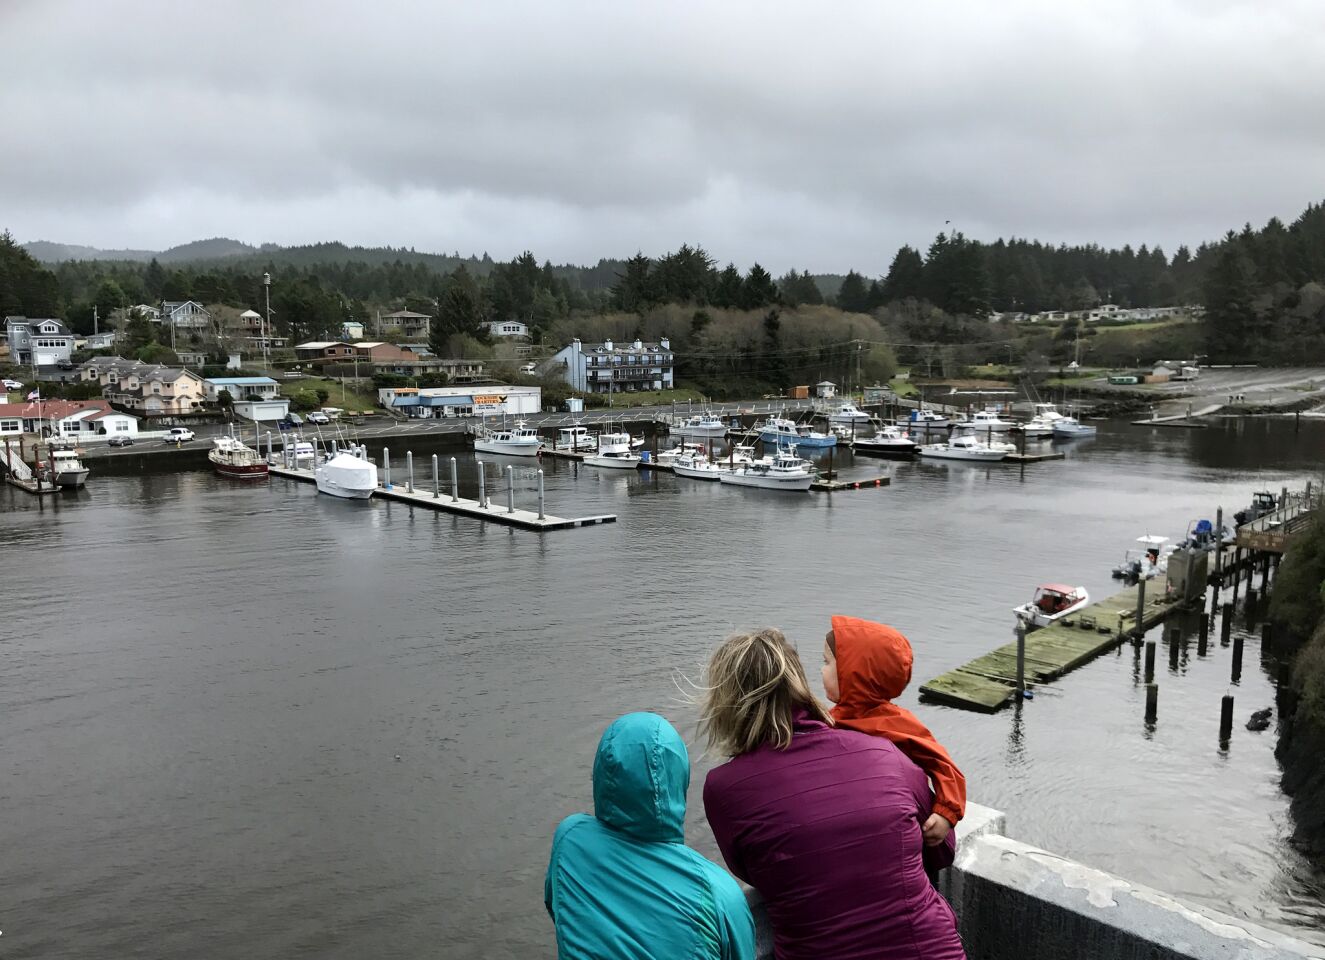 Depoe Bay, Ore., boasts what is billed as the world's smallest harbor. The views are splendid too.